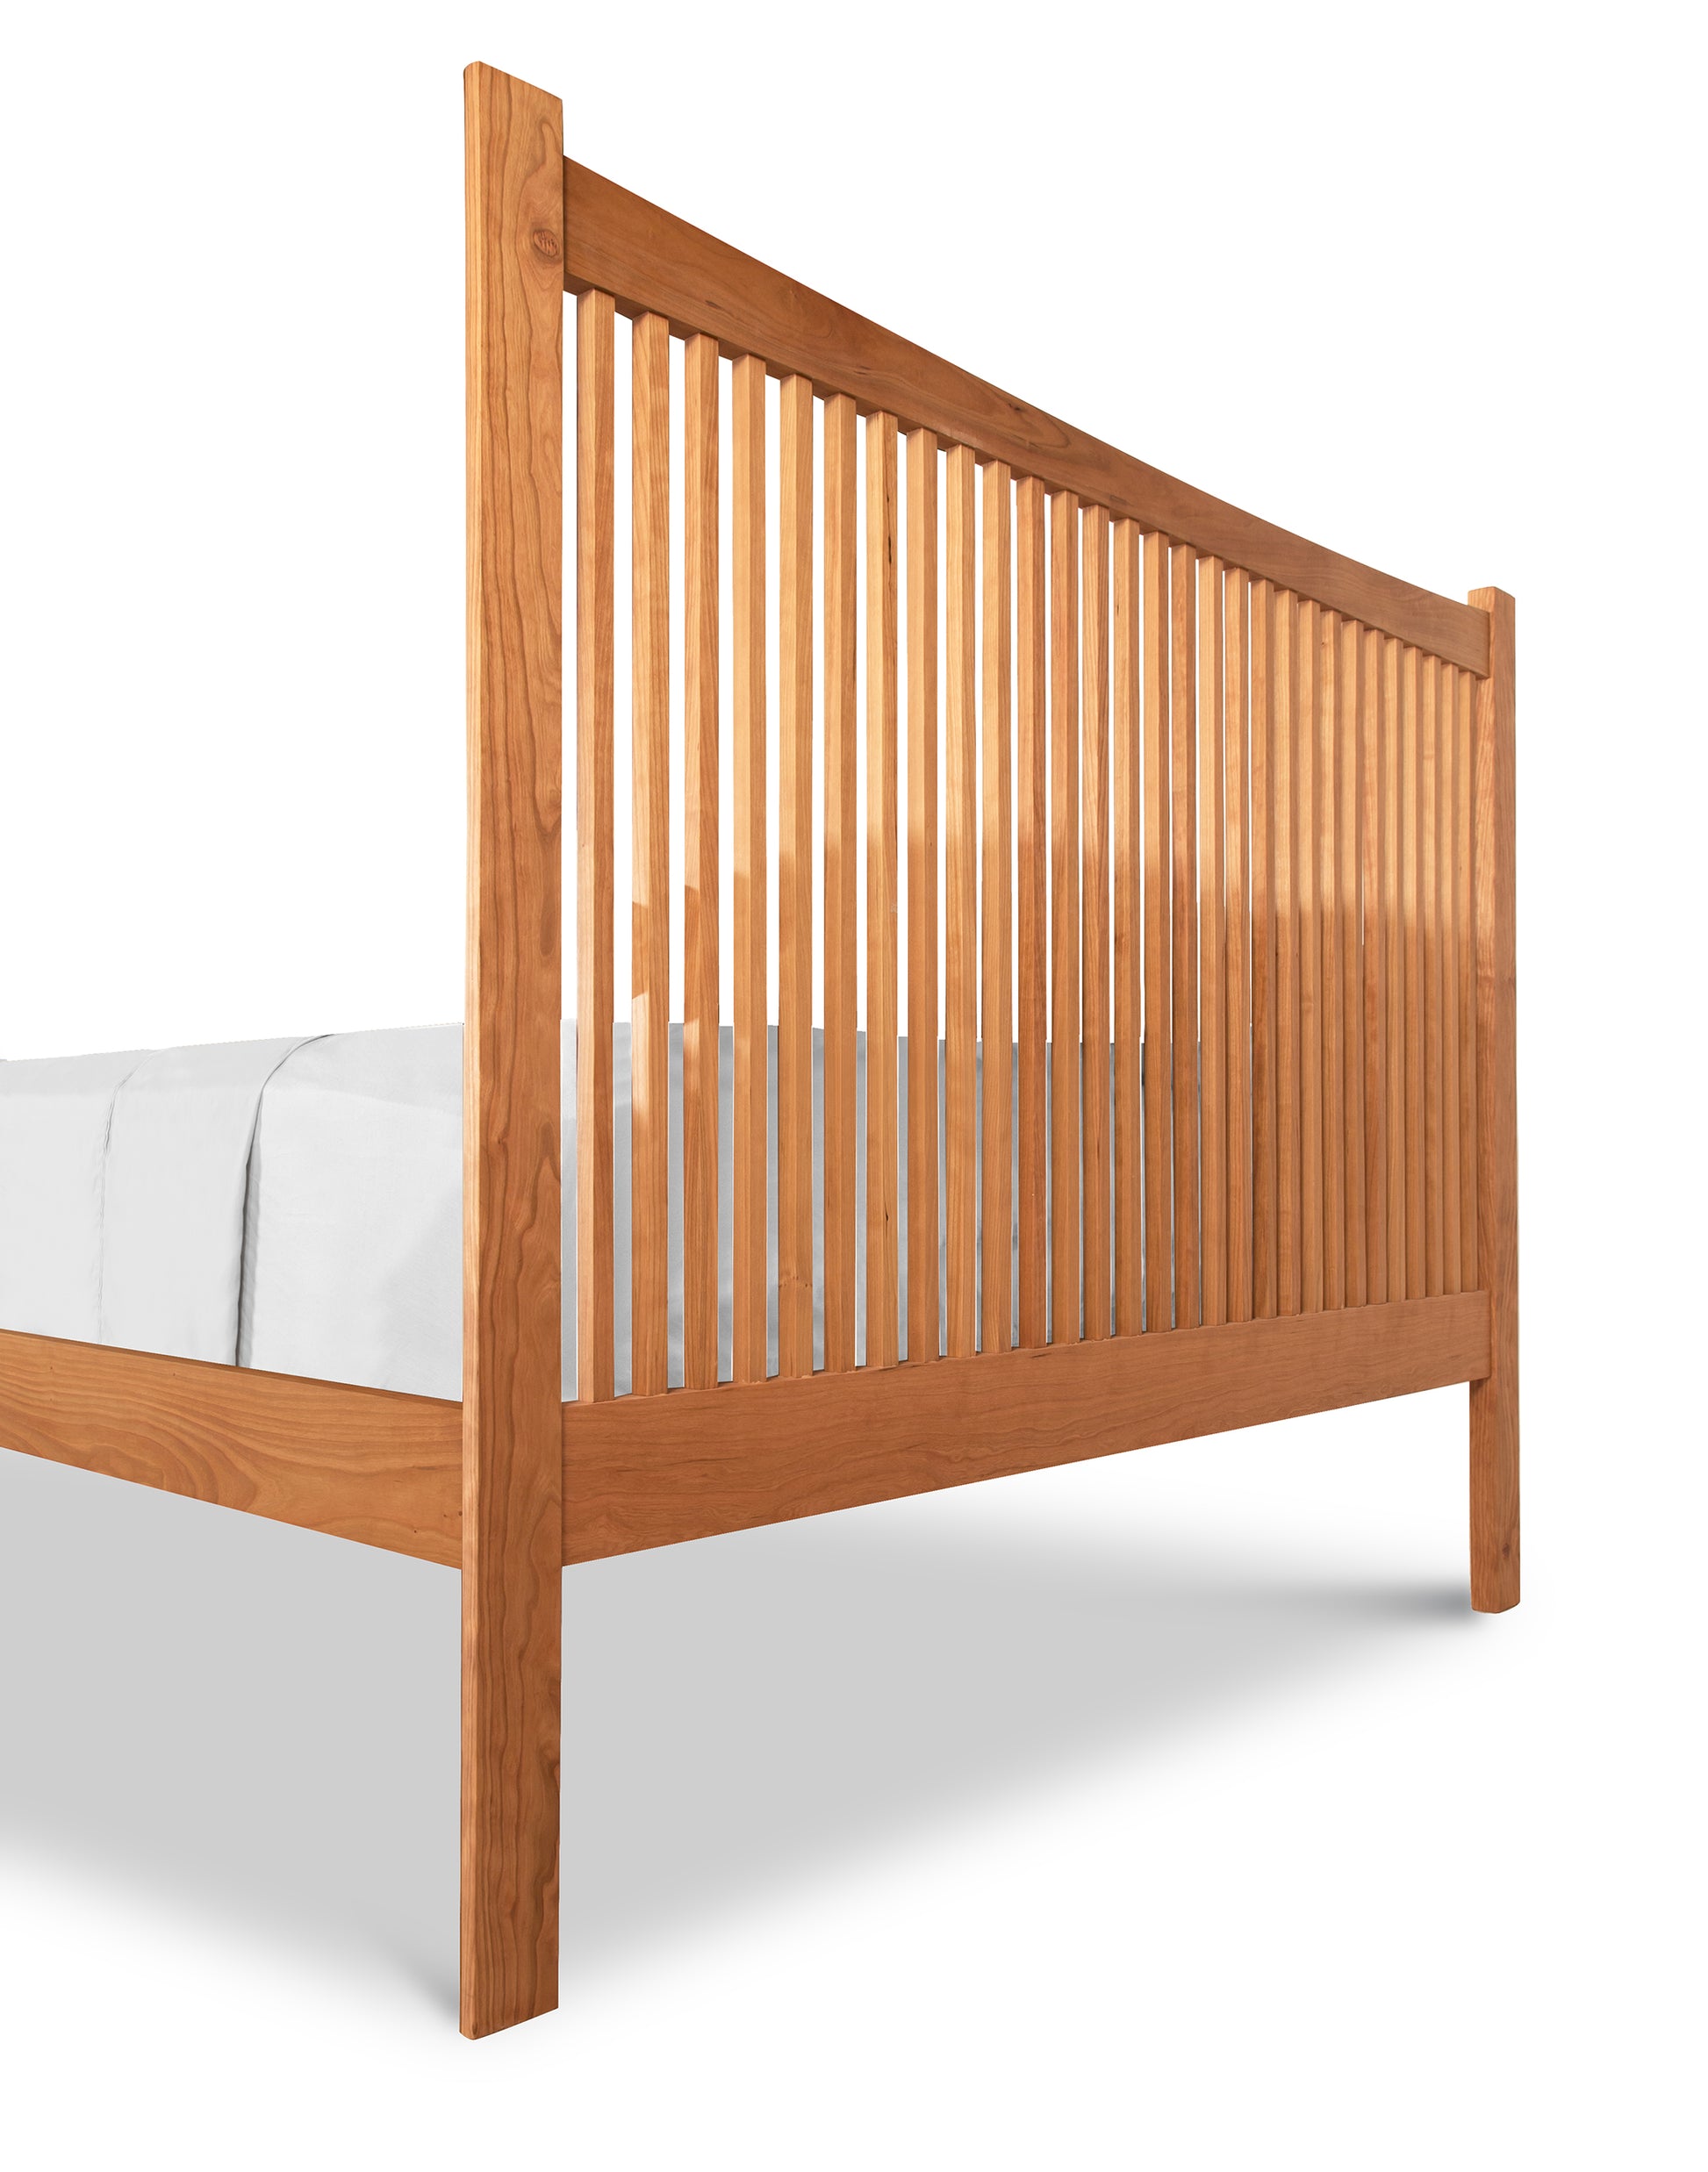 Heartwood Shaker Low Footboard Bed frame with slatted headboard, showcasing arts and crafts styling, with white bedding partially visible on the left side by Vermont Furniture Designs.